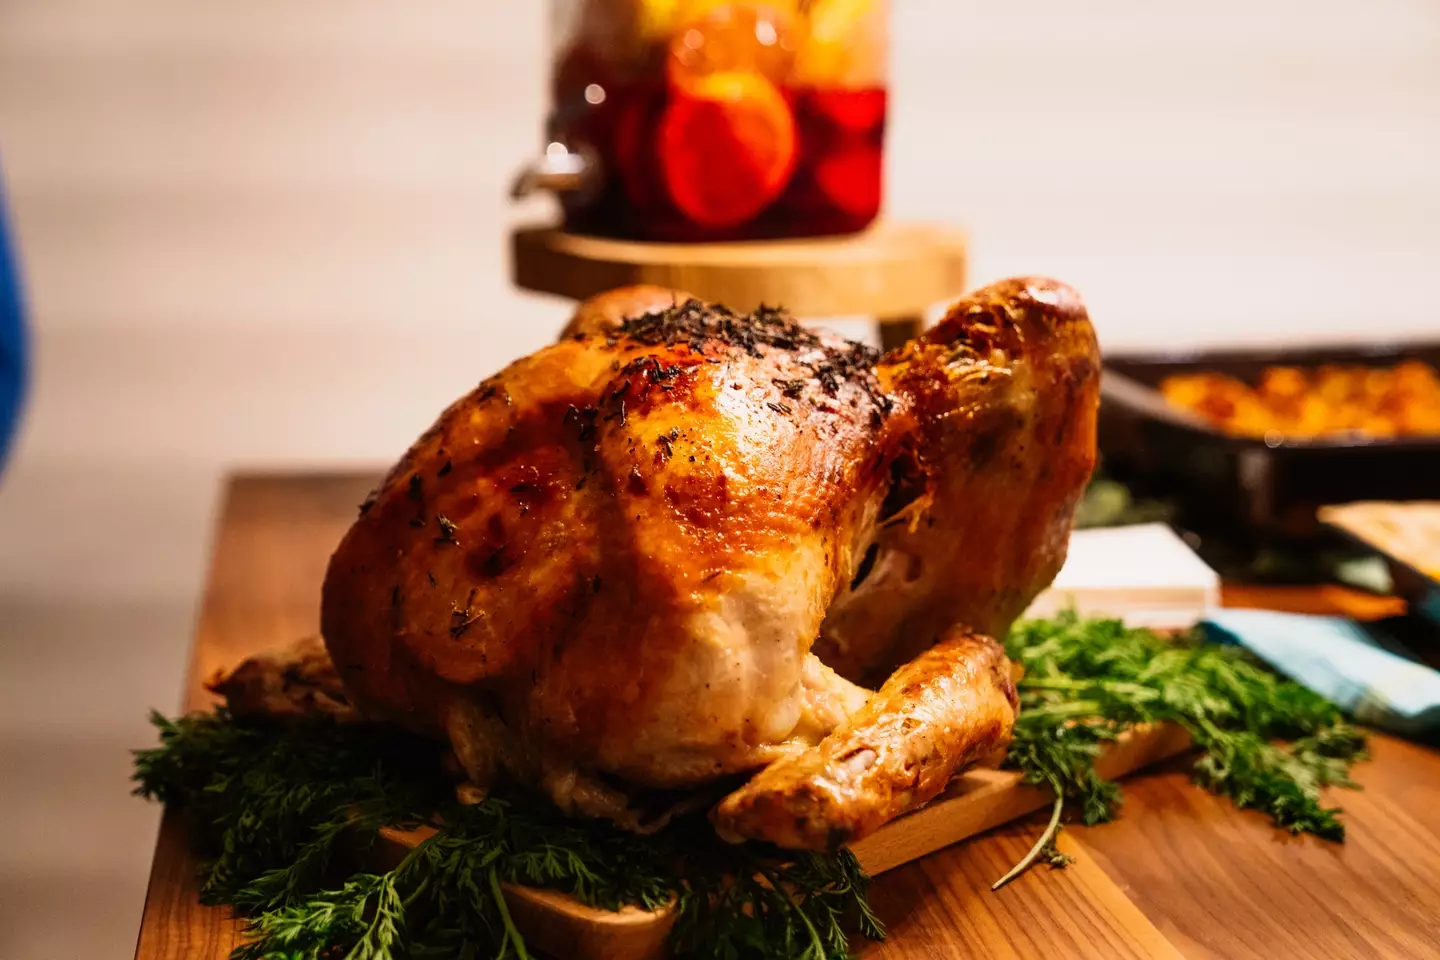 A roast turkey is the centrepiece of Christmas dinners around the country.